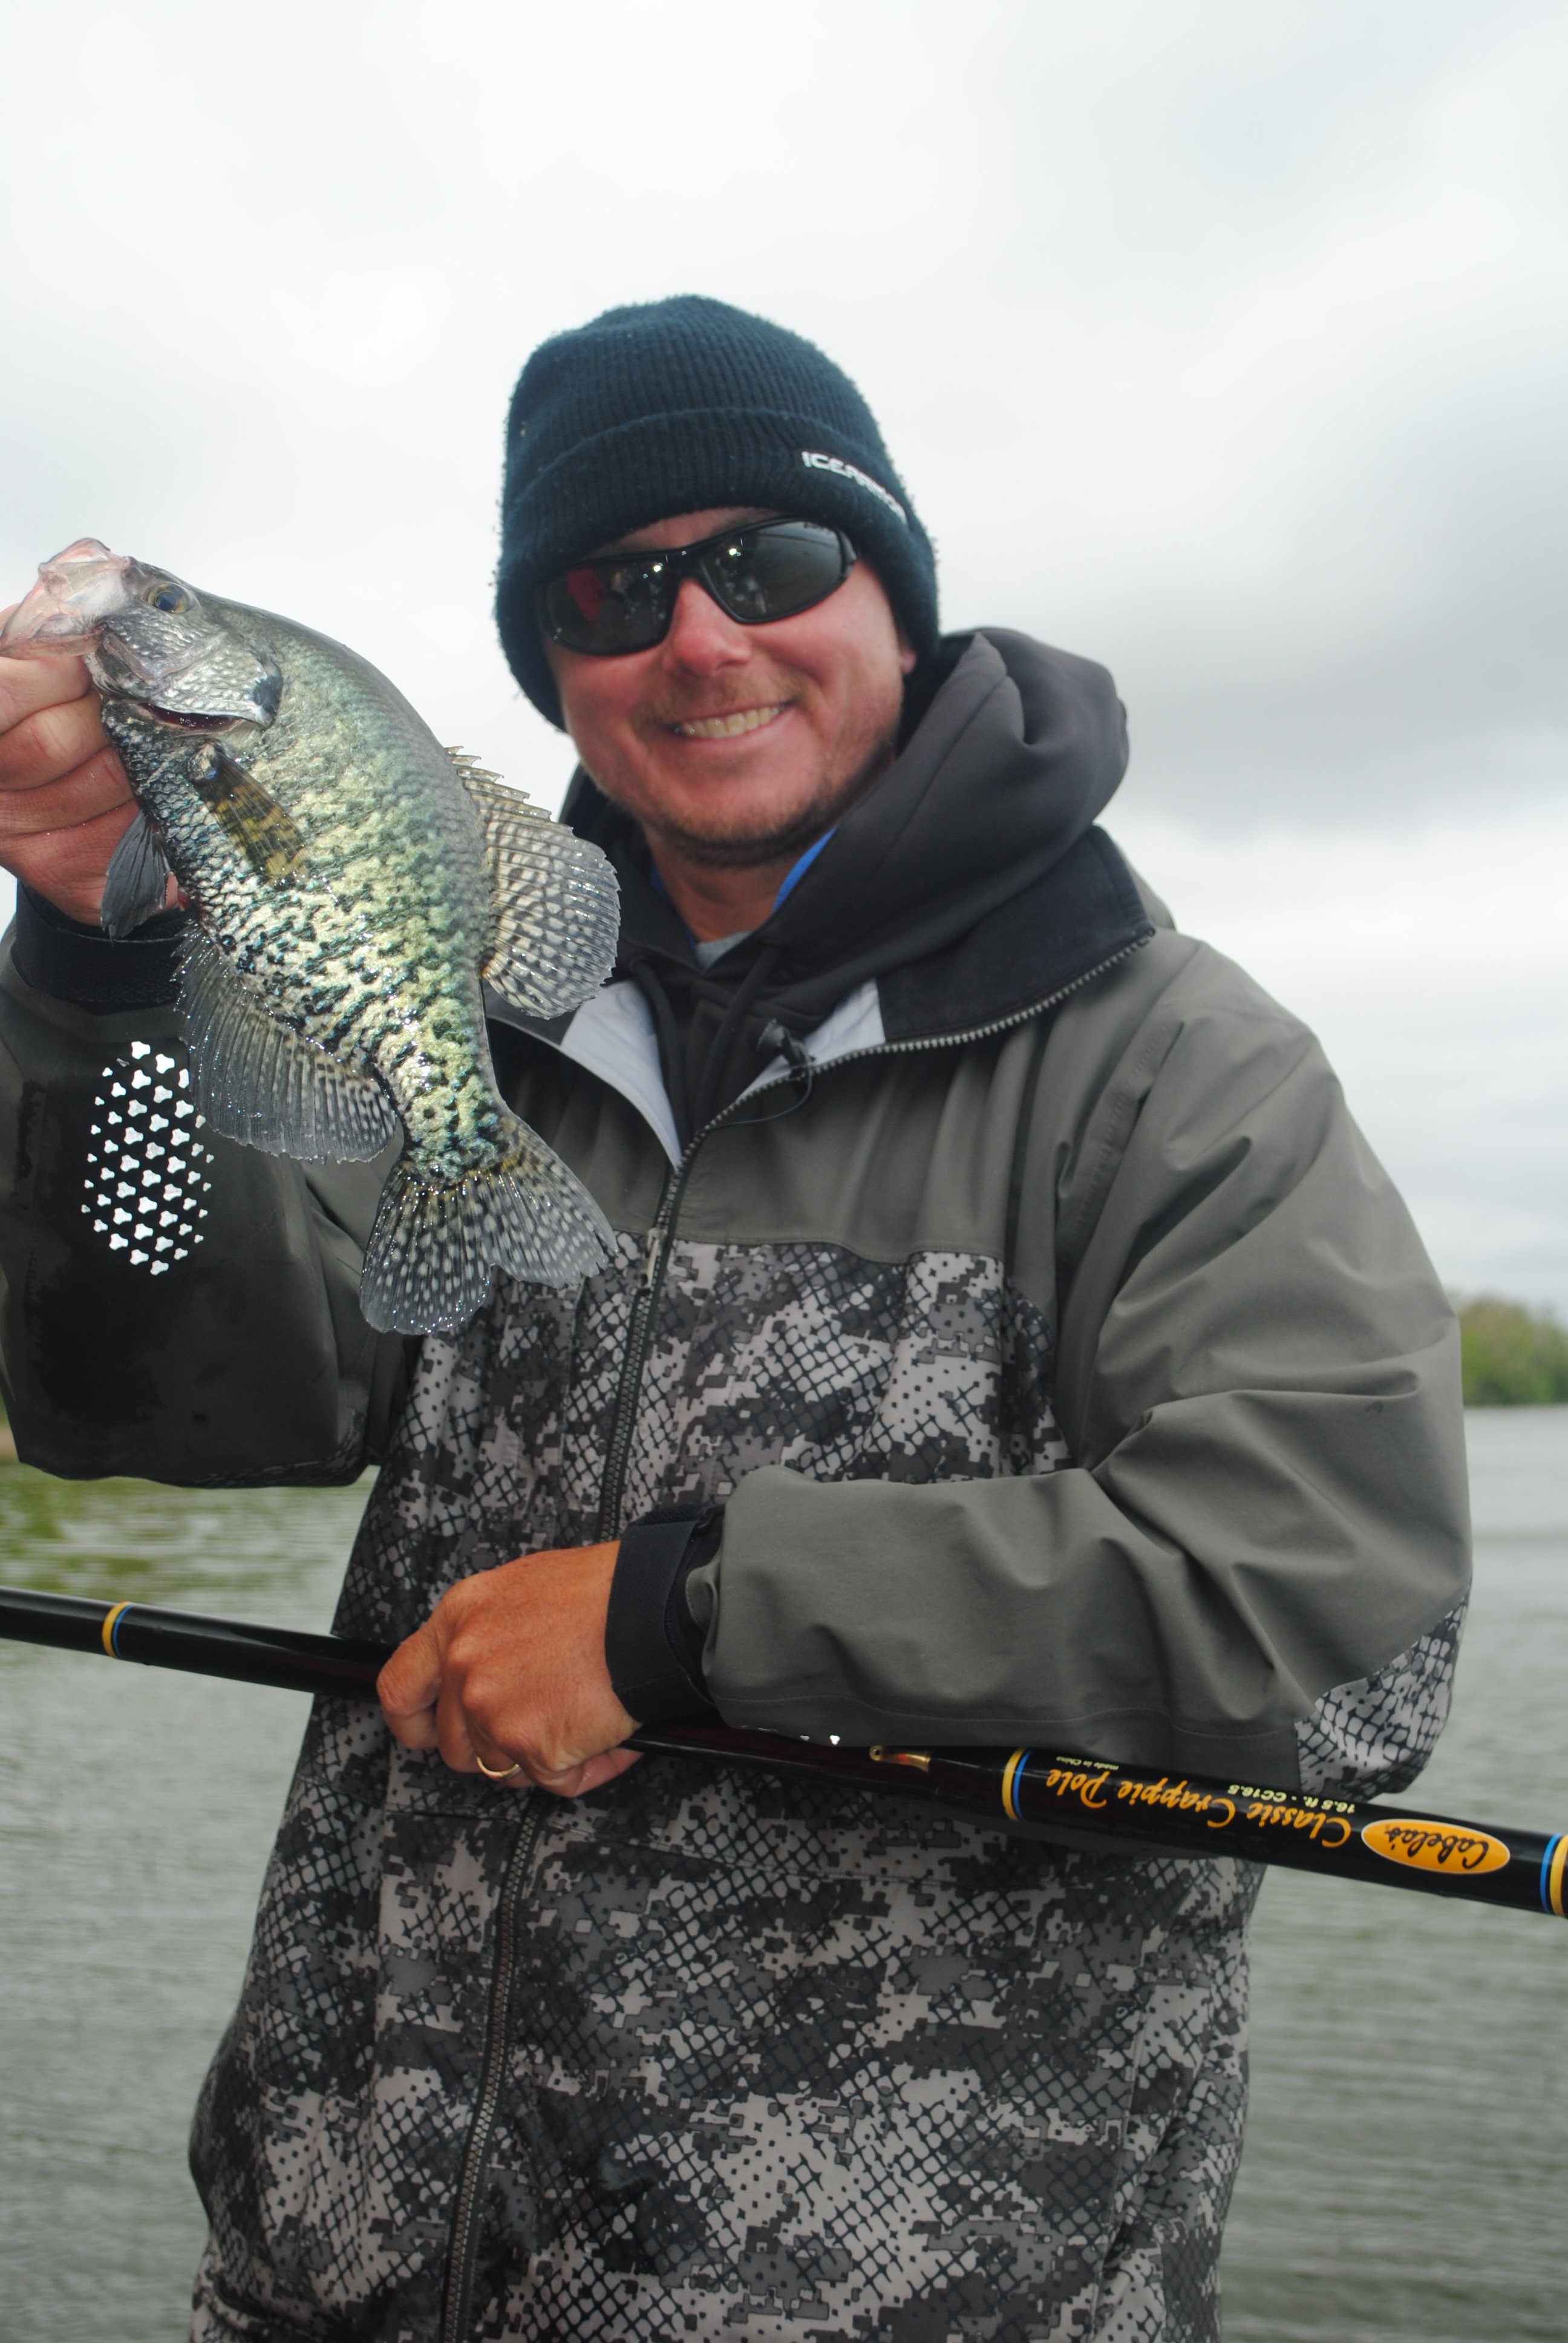 Your best Crappie/Panfish colors?